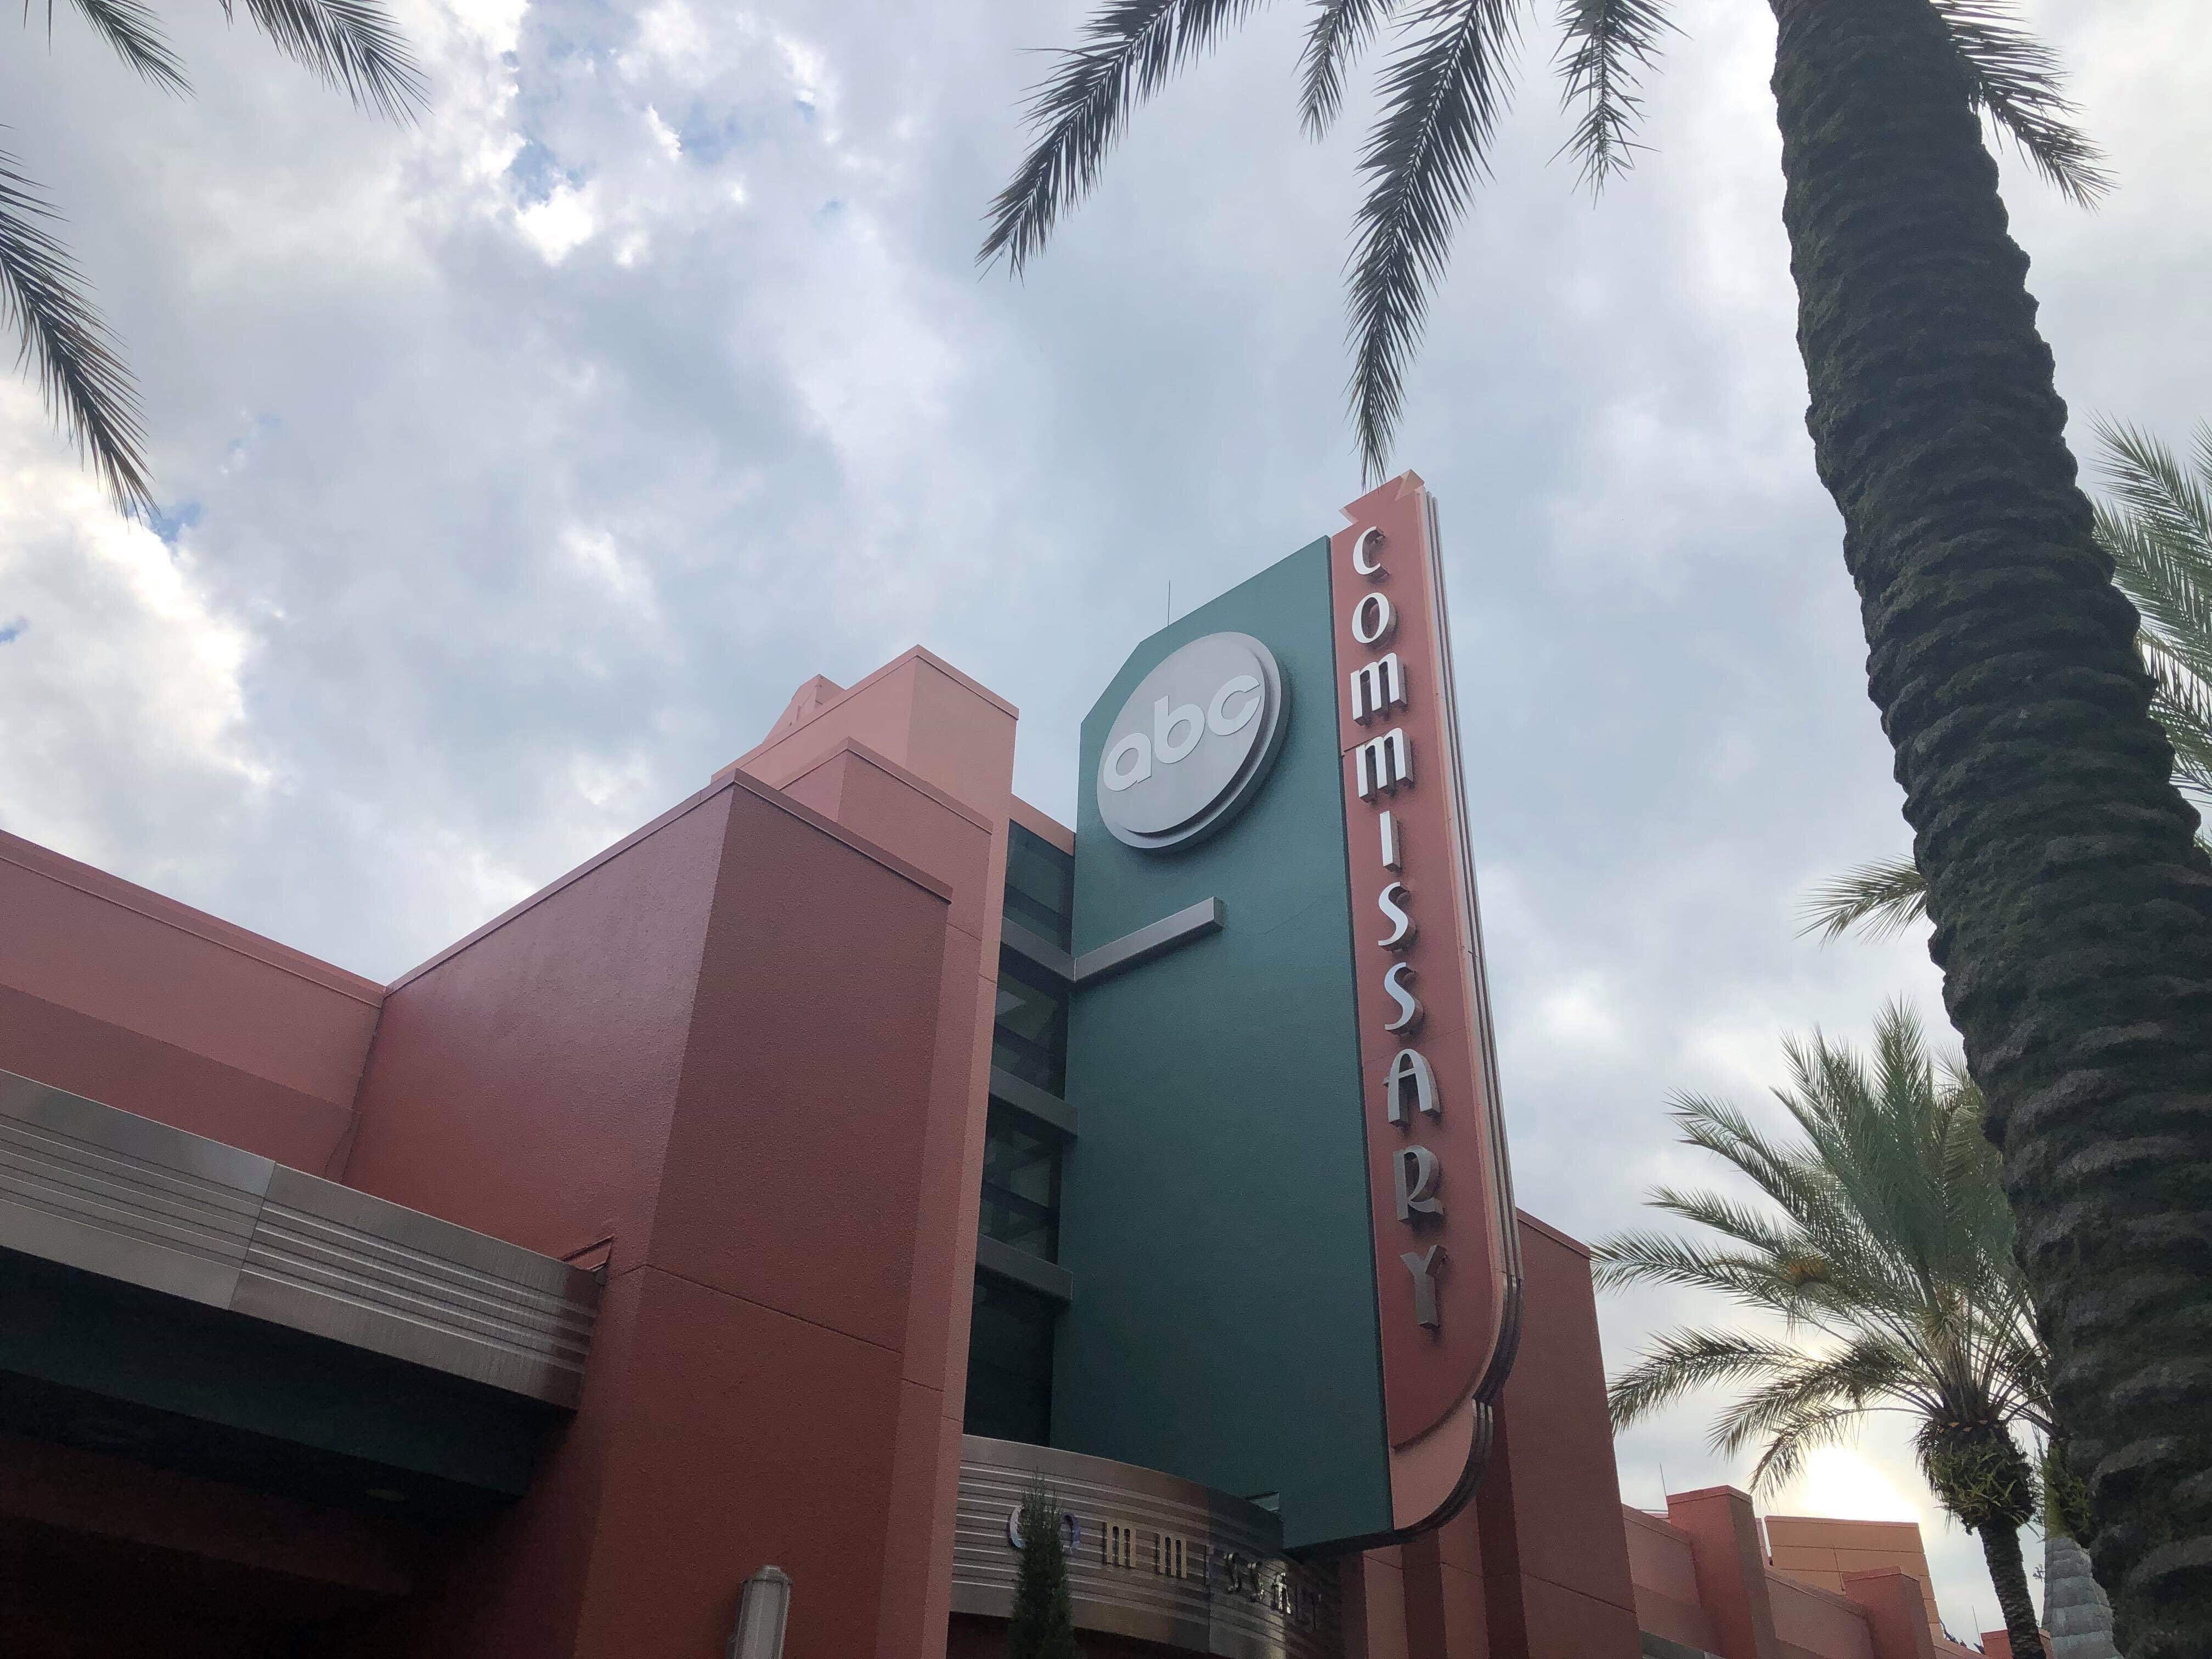 ABC Commissary Has Reopened at Disney’s Hollywood Studios